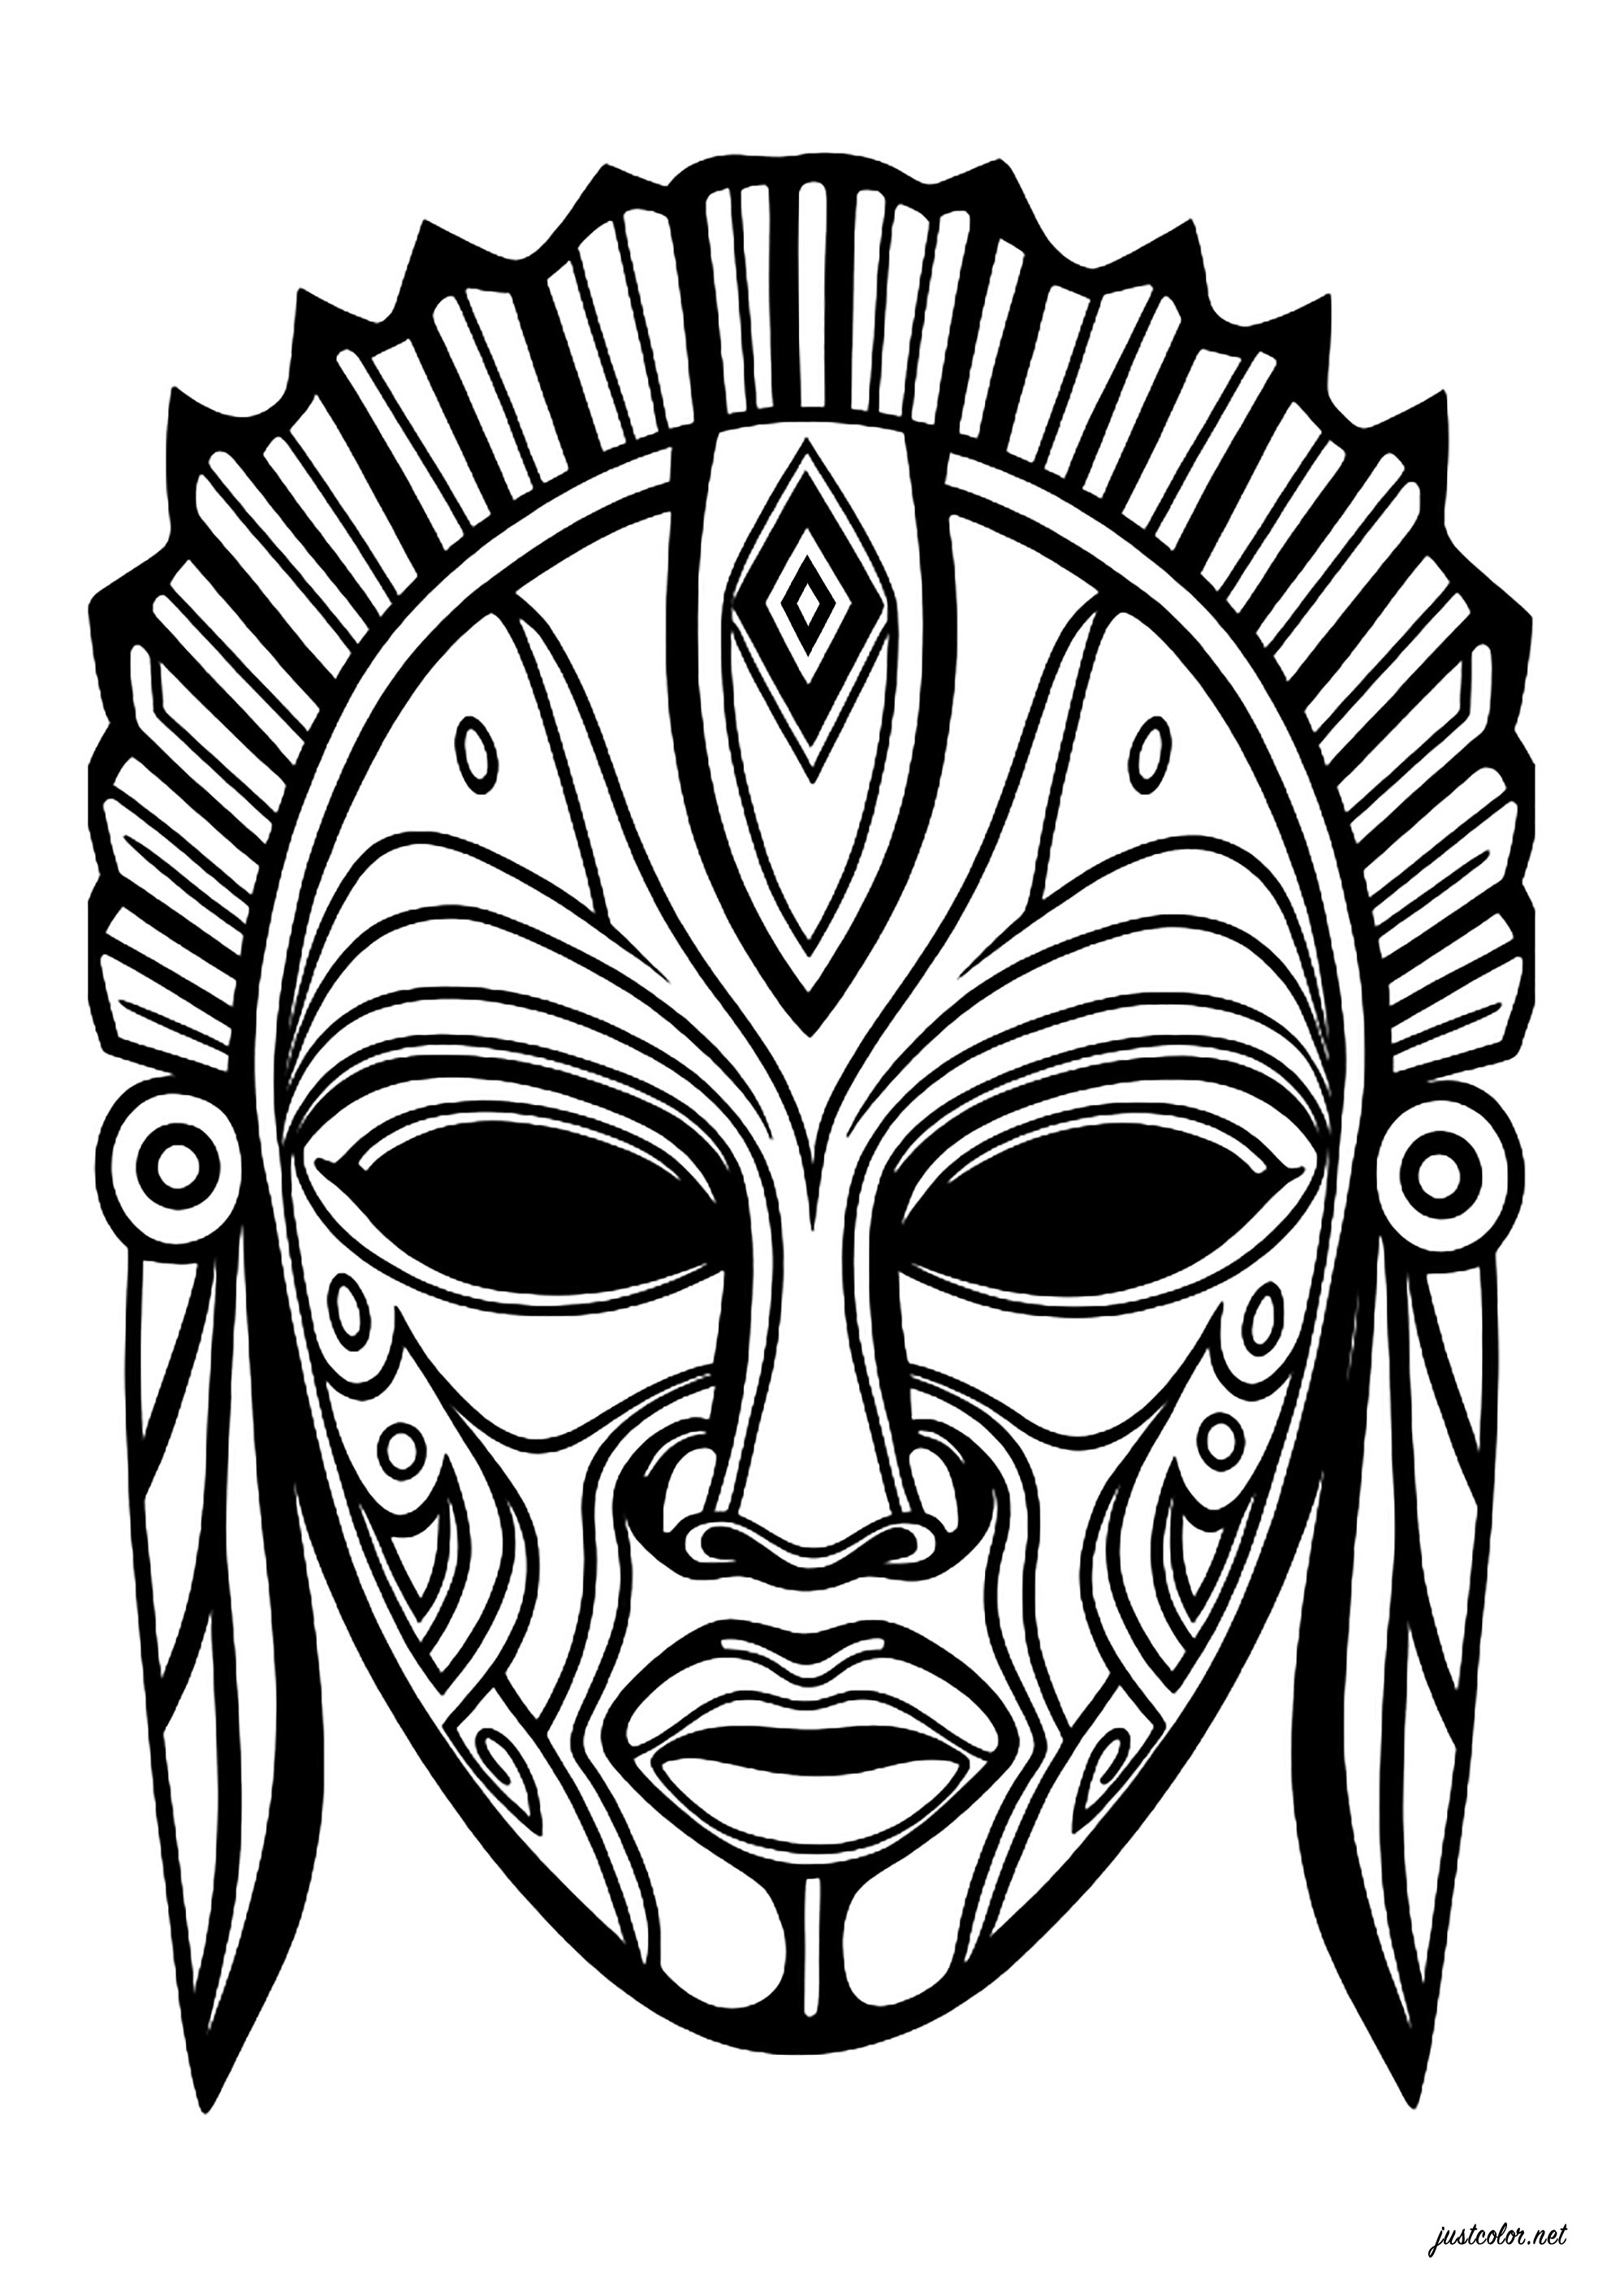 Imaginary mask, inspired by African masks. Numerous interior motifs, allowing the mask to be colored in a wide range of colors